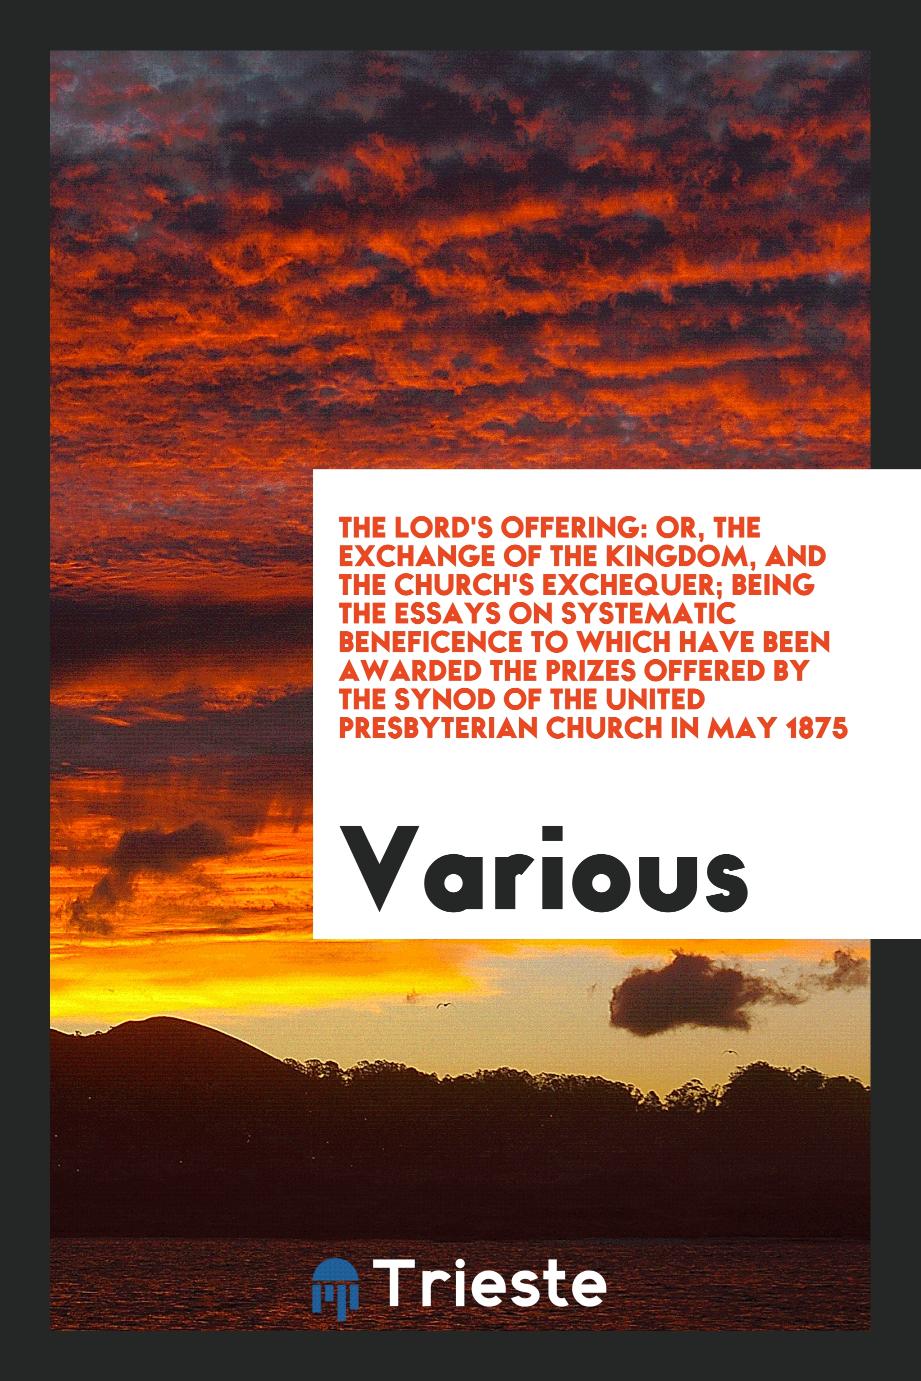 The Lord's offering: or, The exchange of the kingdom, and The Church's exchequer; being the essays on systematic beneficence to which have been awarded the prizes offered by the synod of the United Presbyterian Church in May 1875